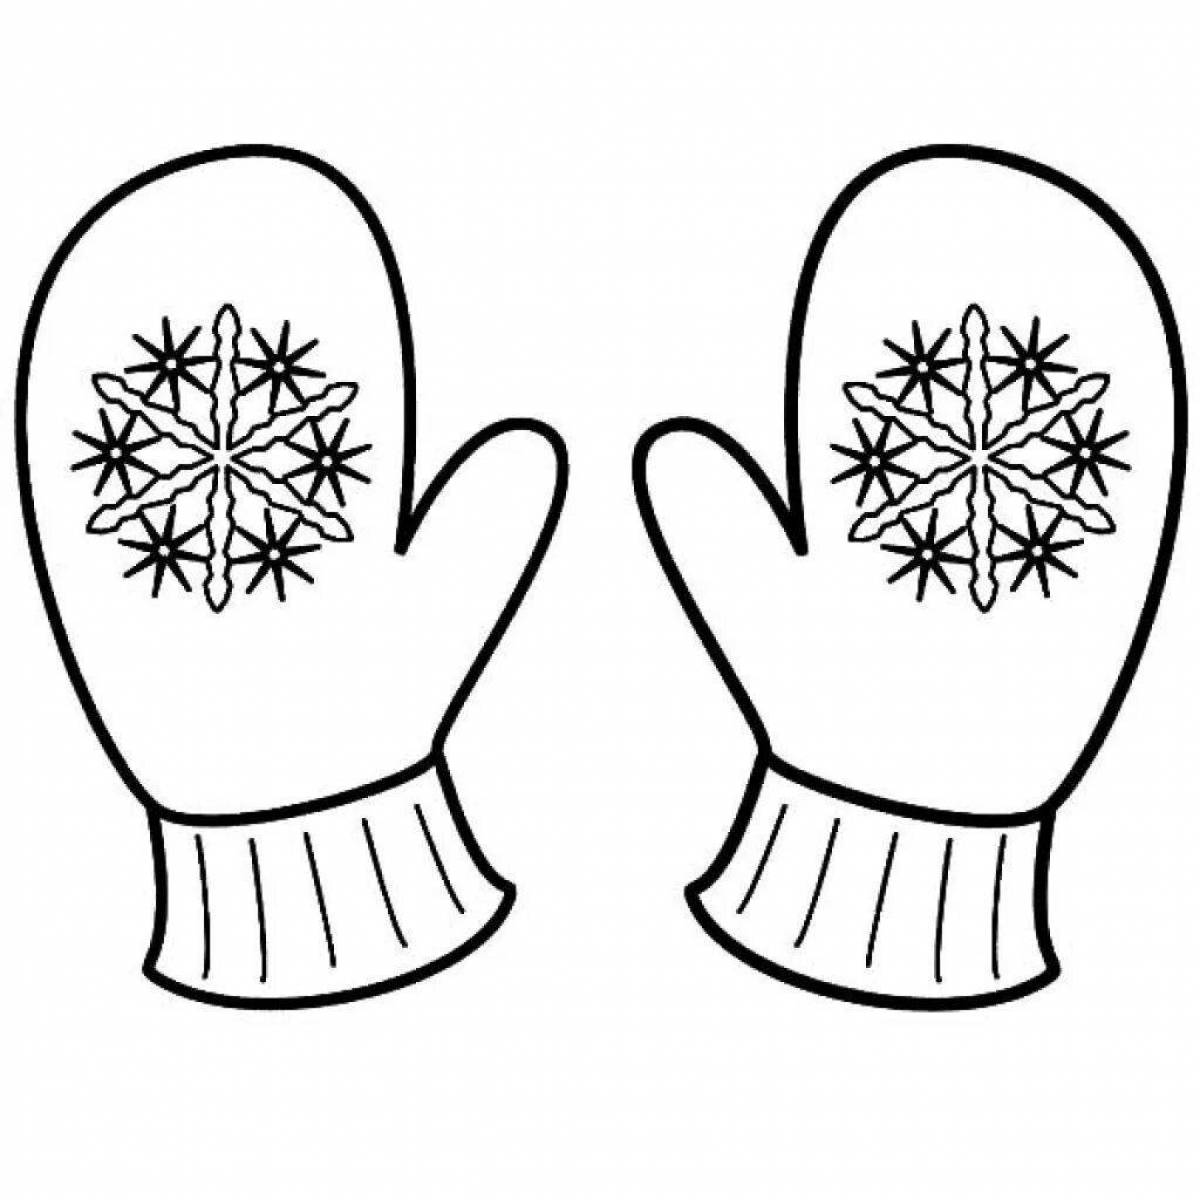 Student dazzling mitten coloring page